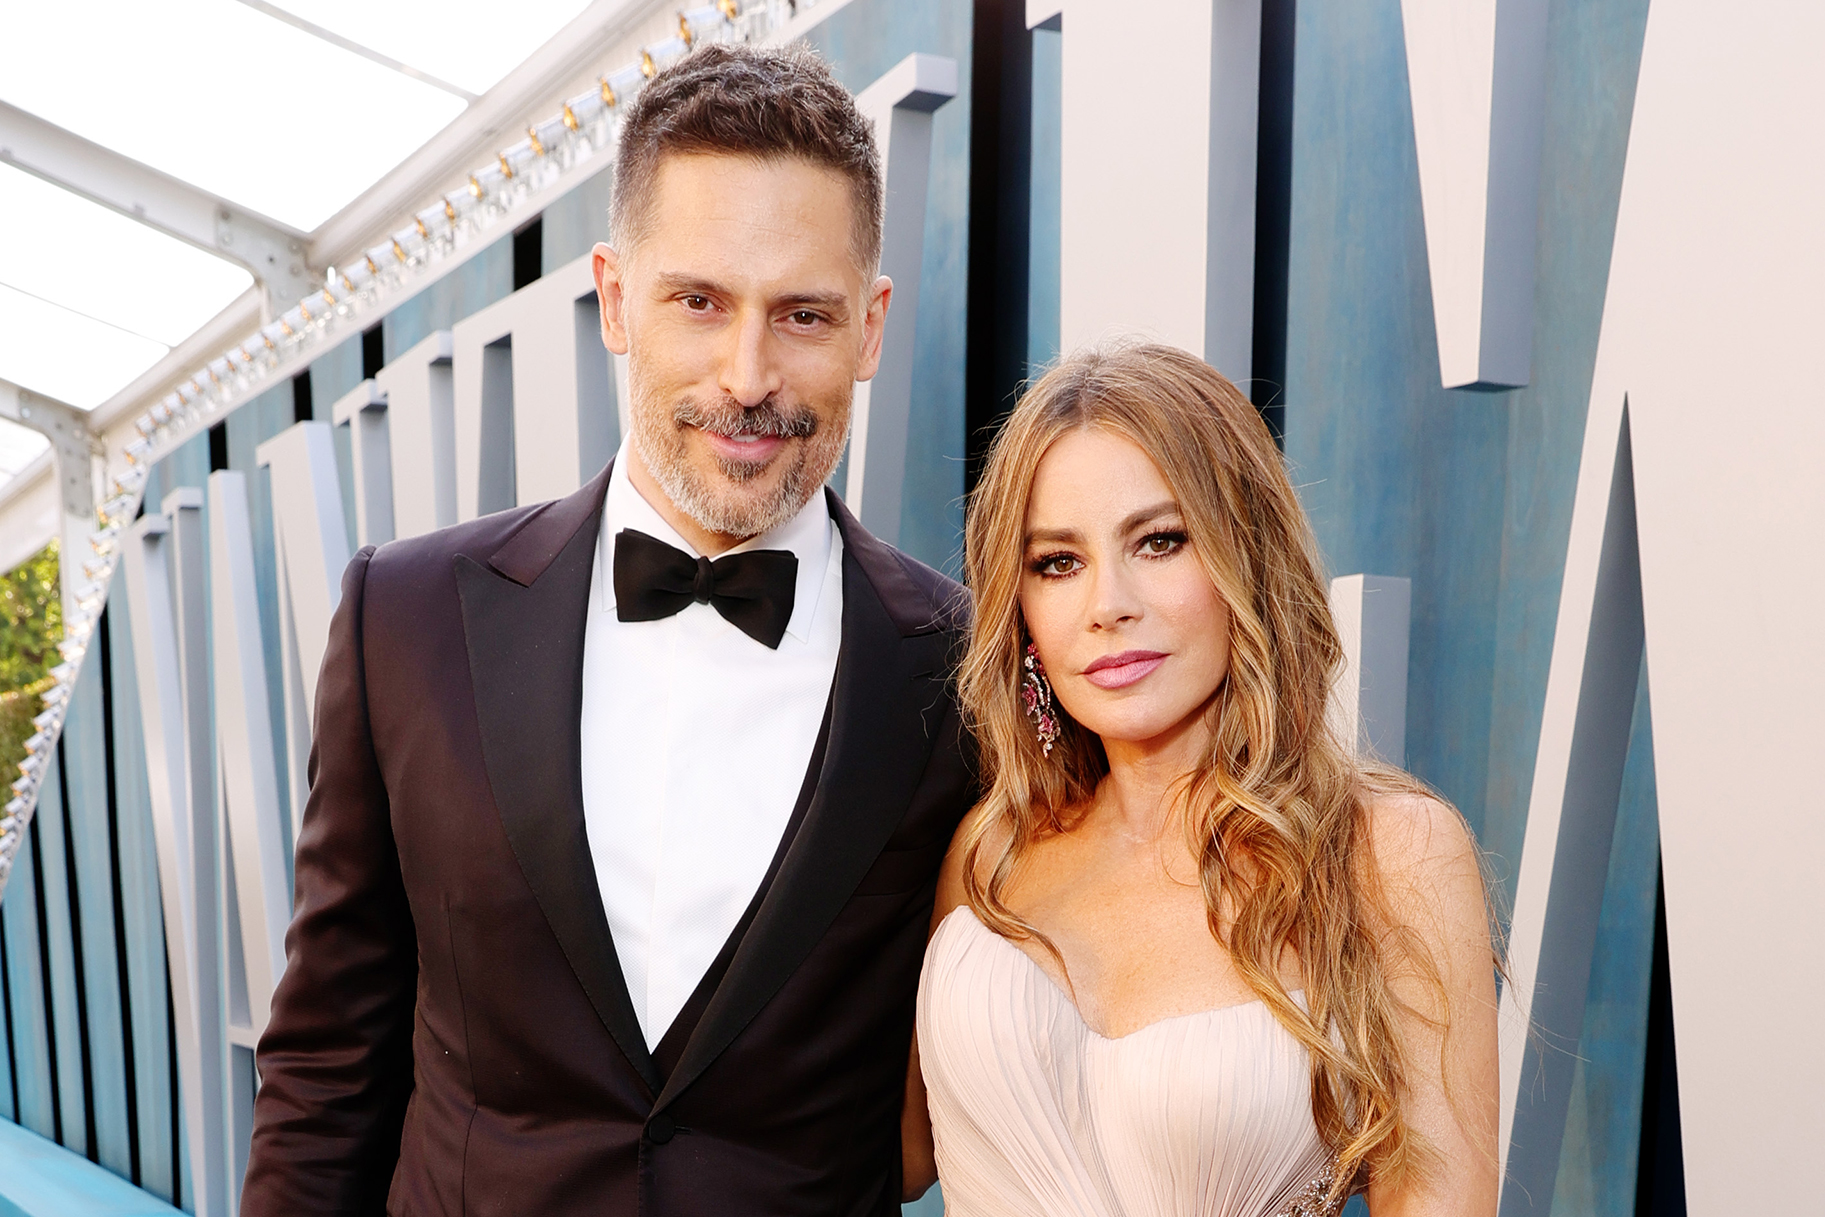 Sofia Vergara exposed after posting a photo: She's being compared